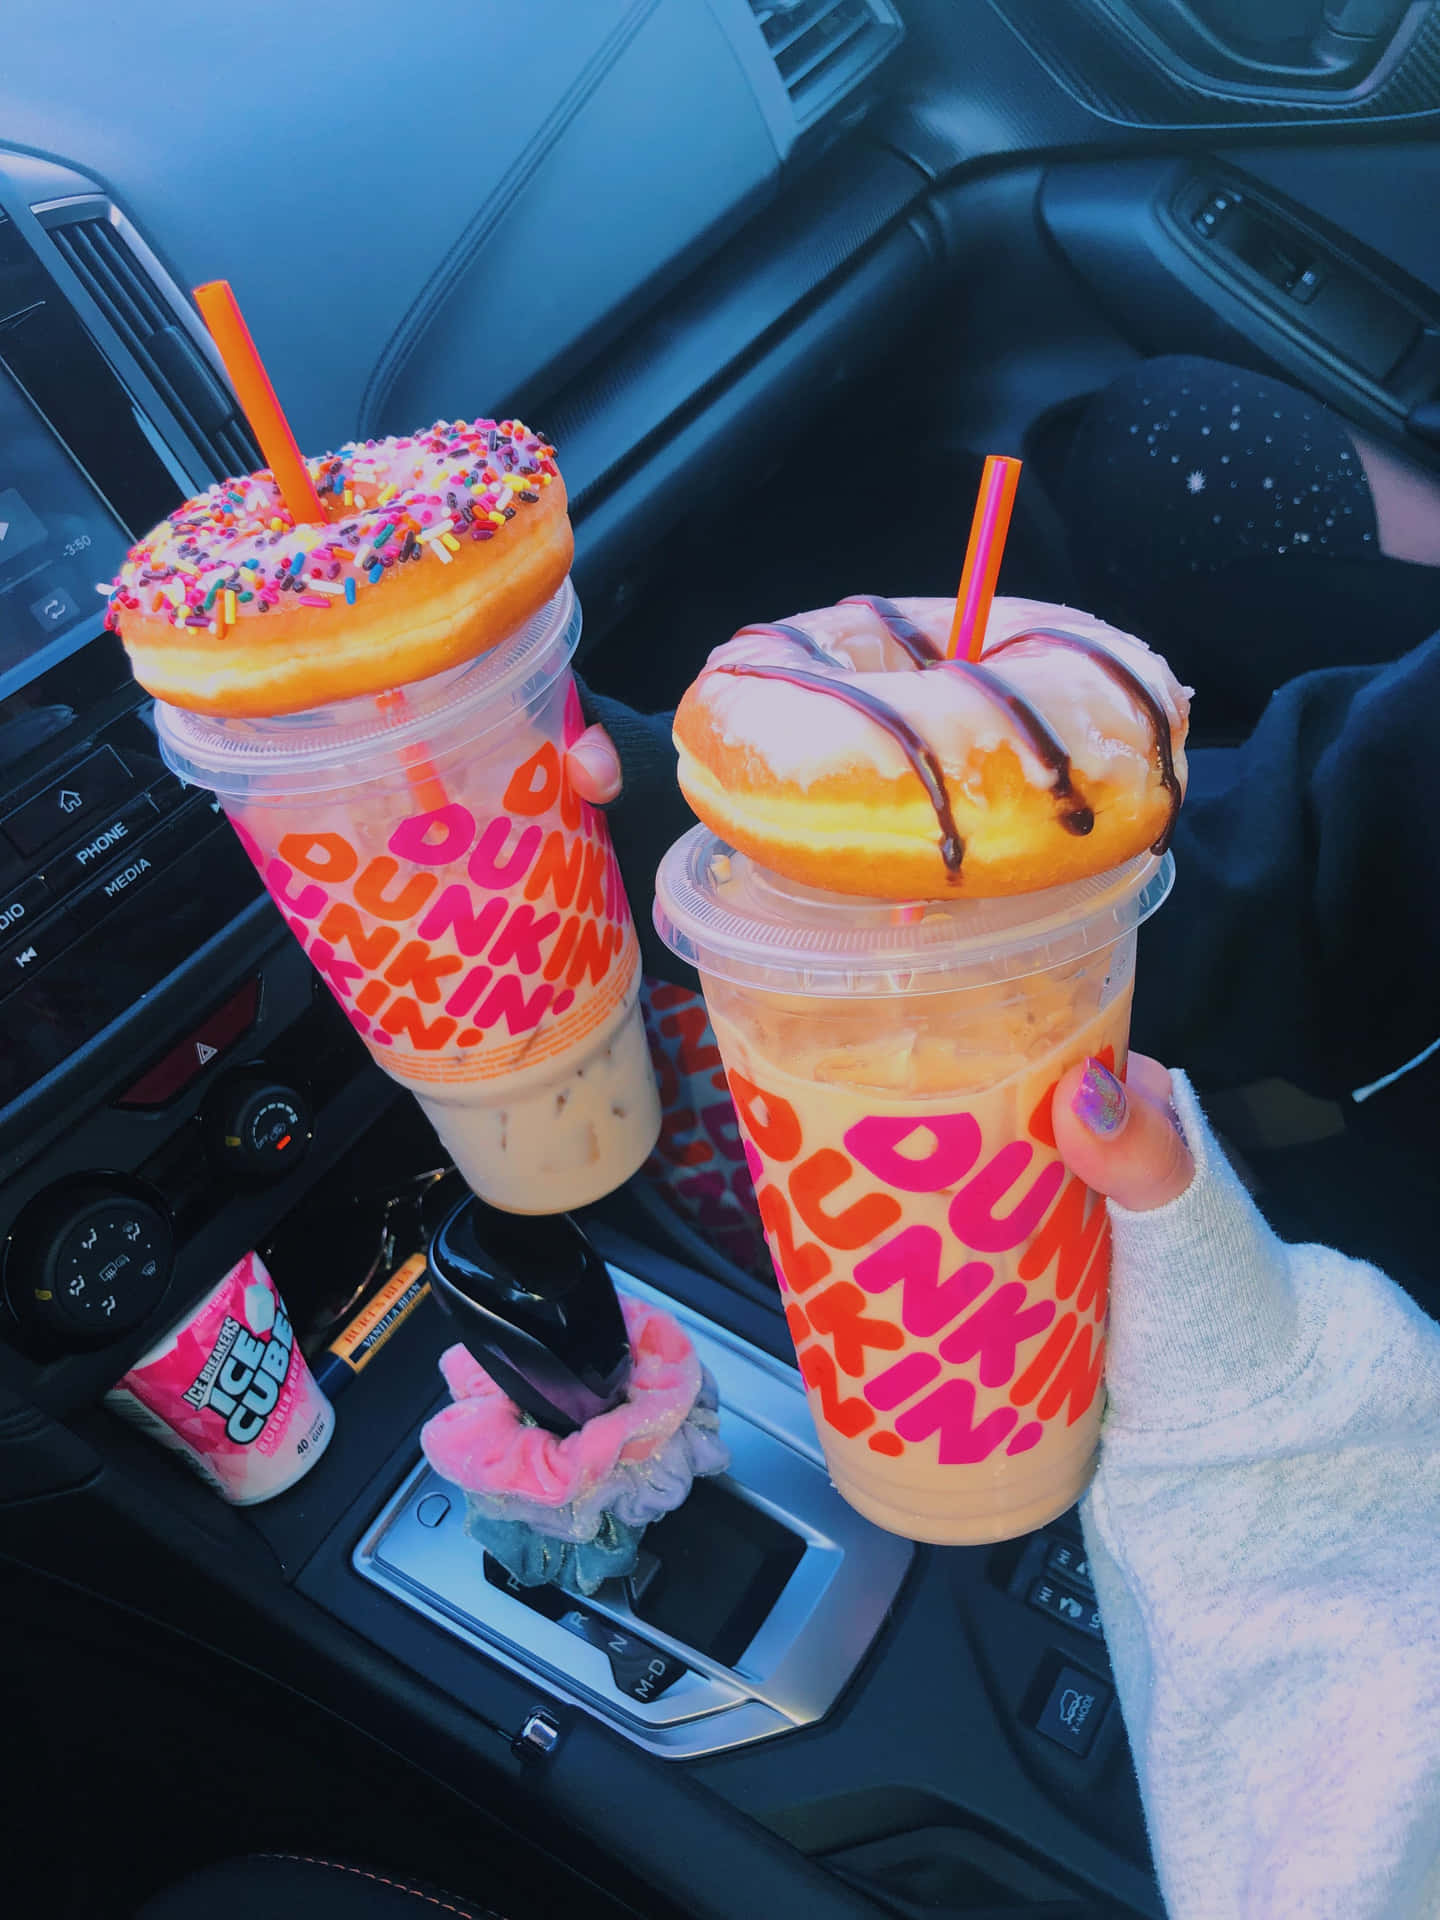 "Start the day with the Dunkin' Donuts classic"